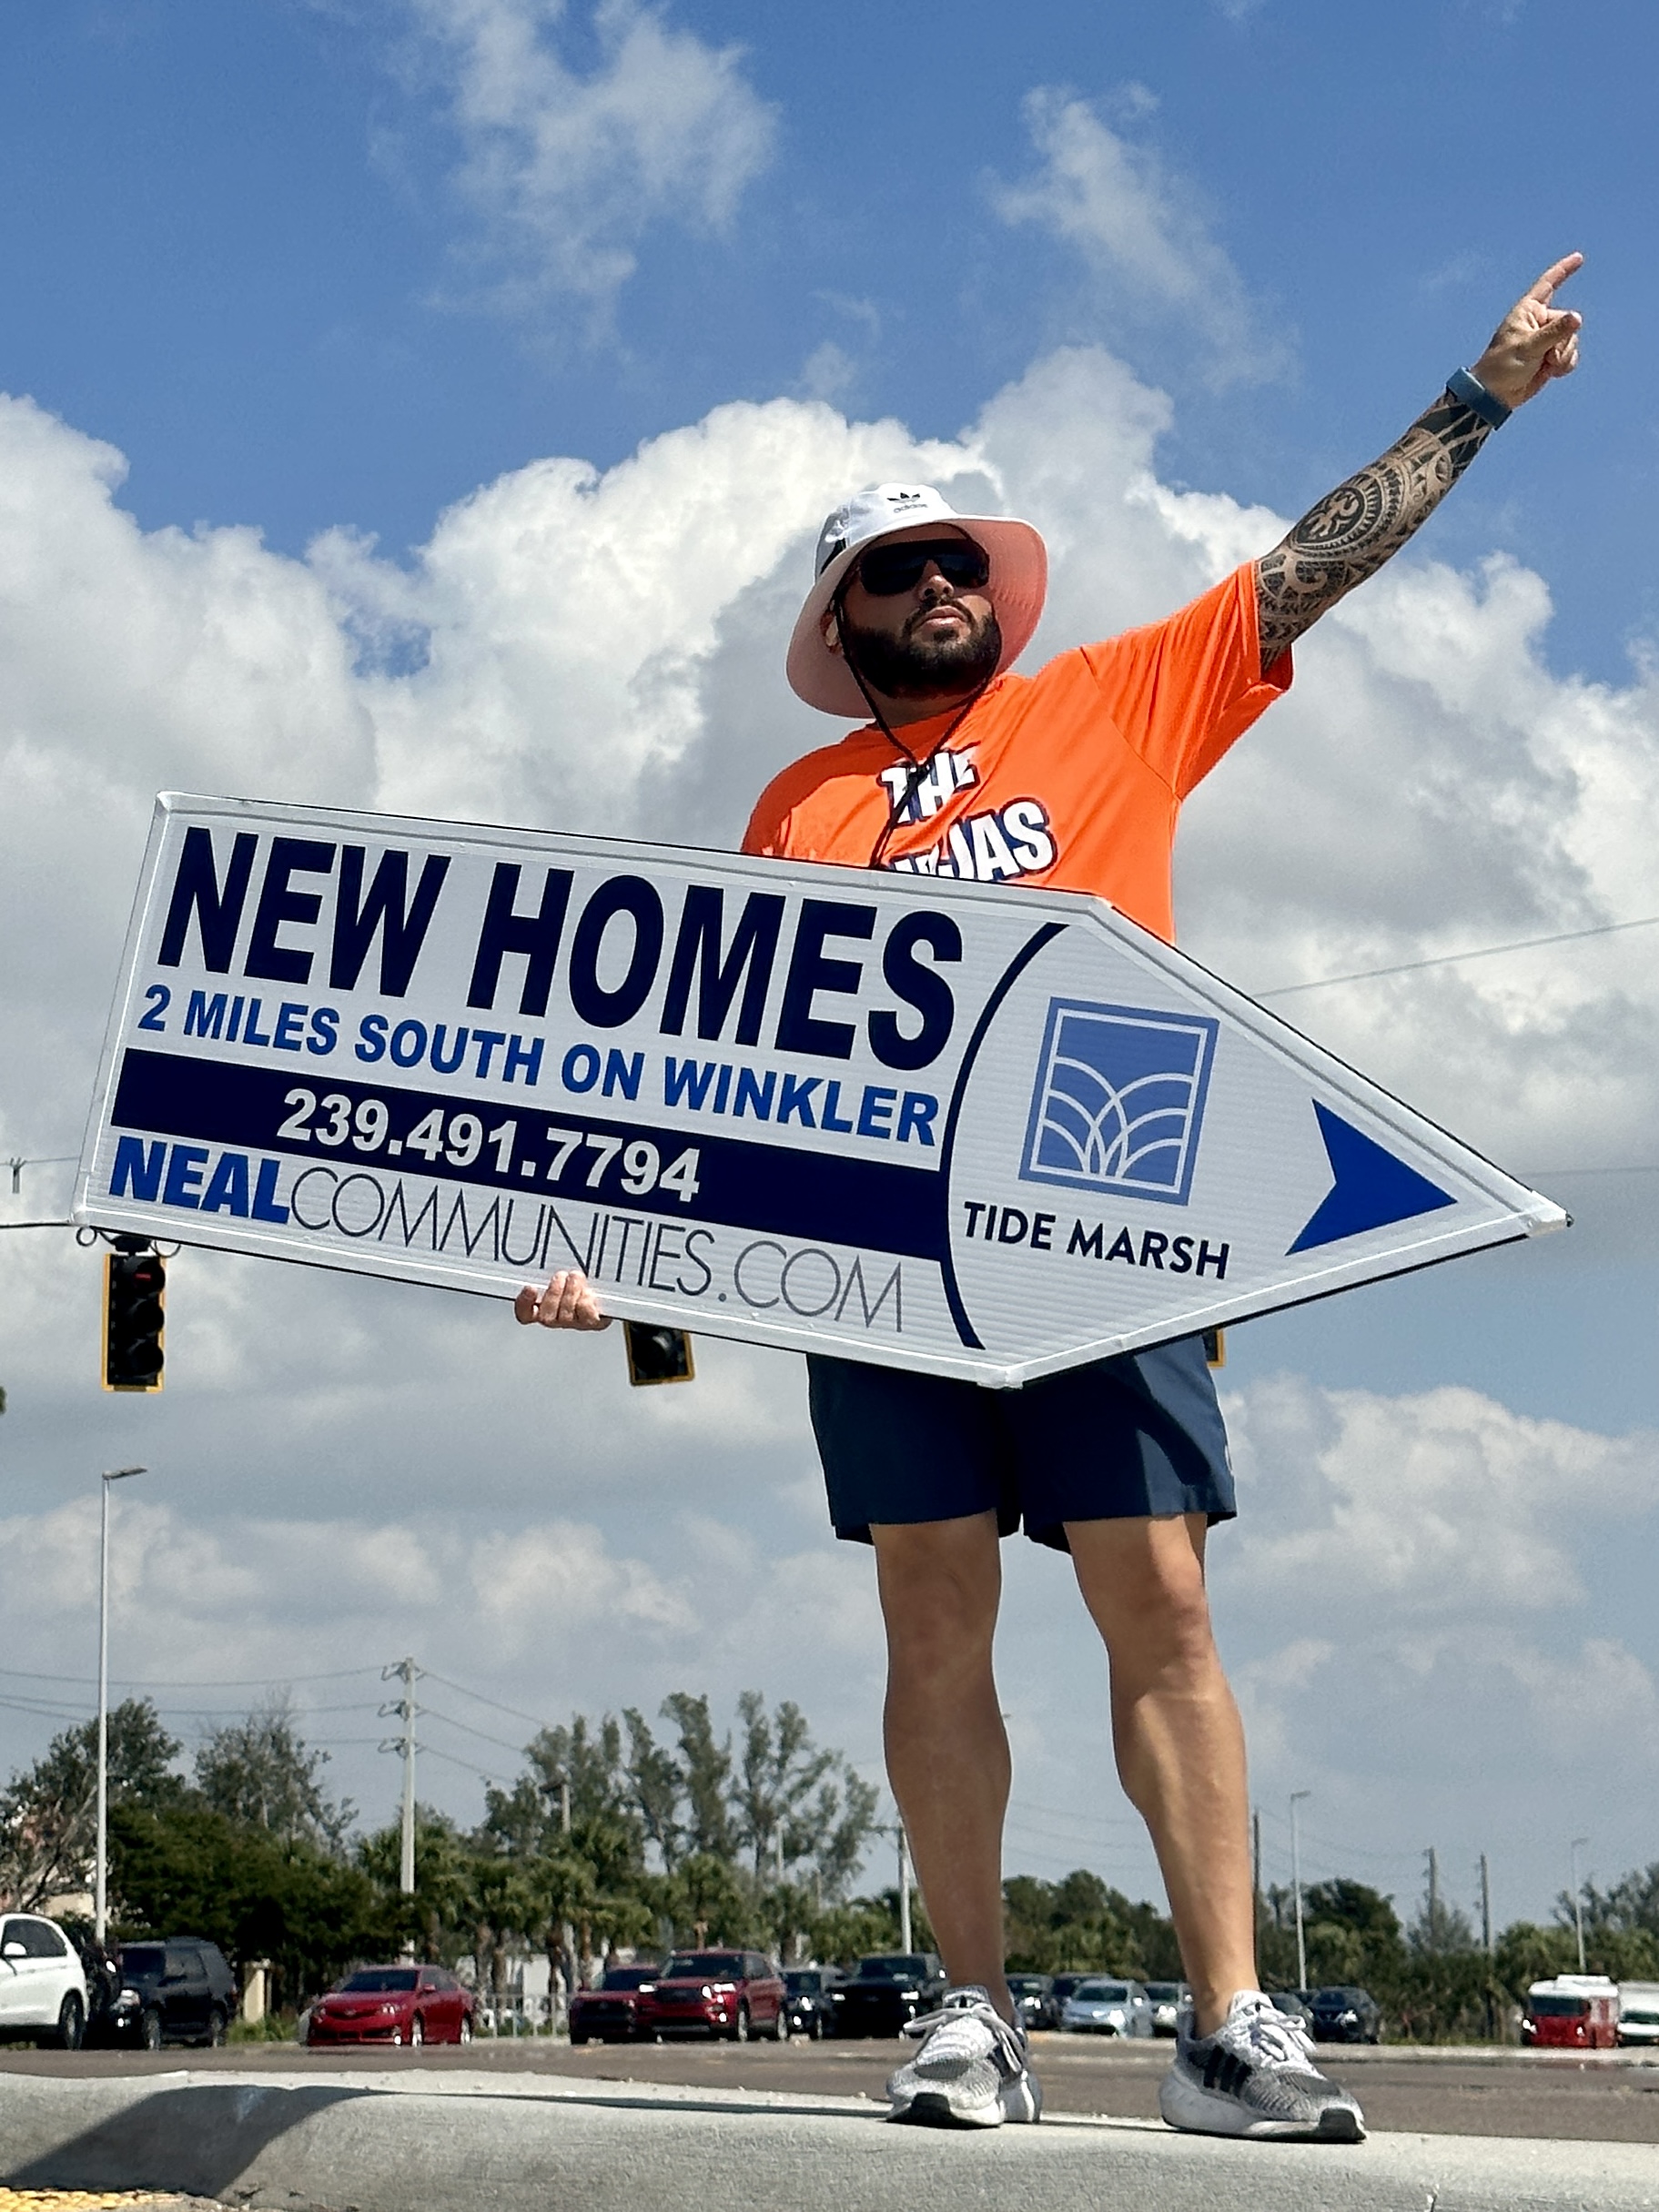 Sign Spinners for Neal Communities in Florida